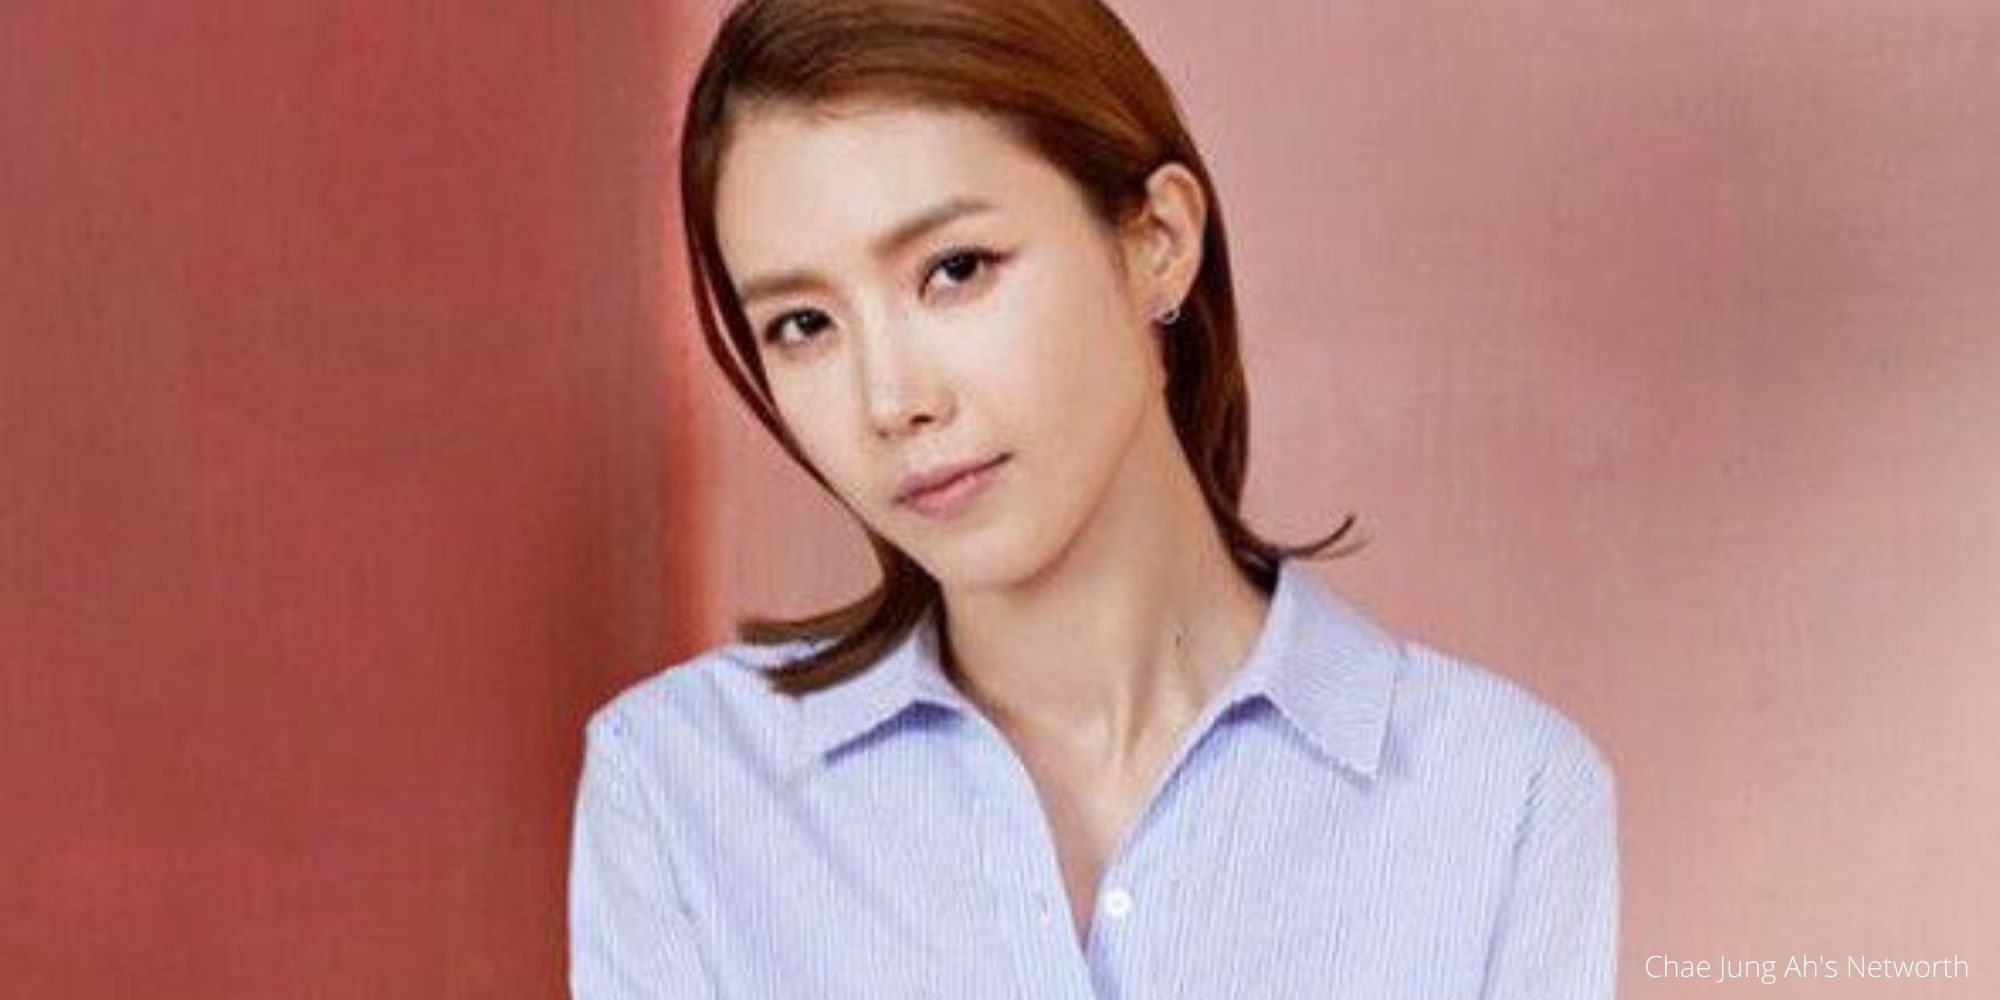 Chae Jung Ah's Networth